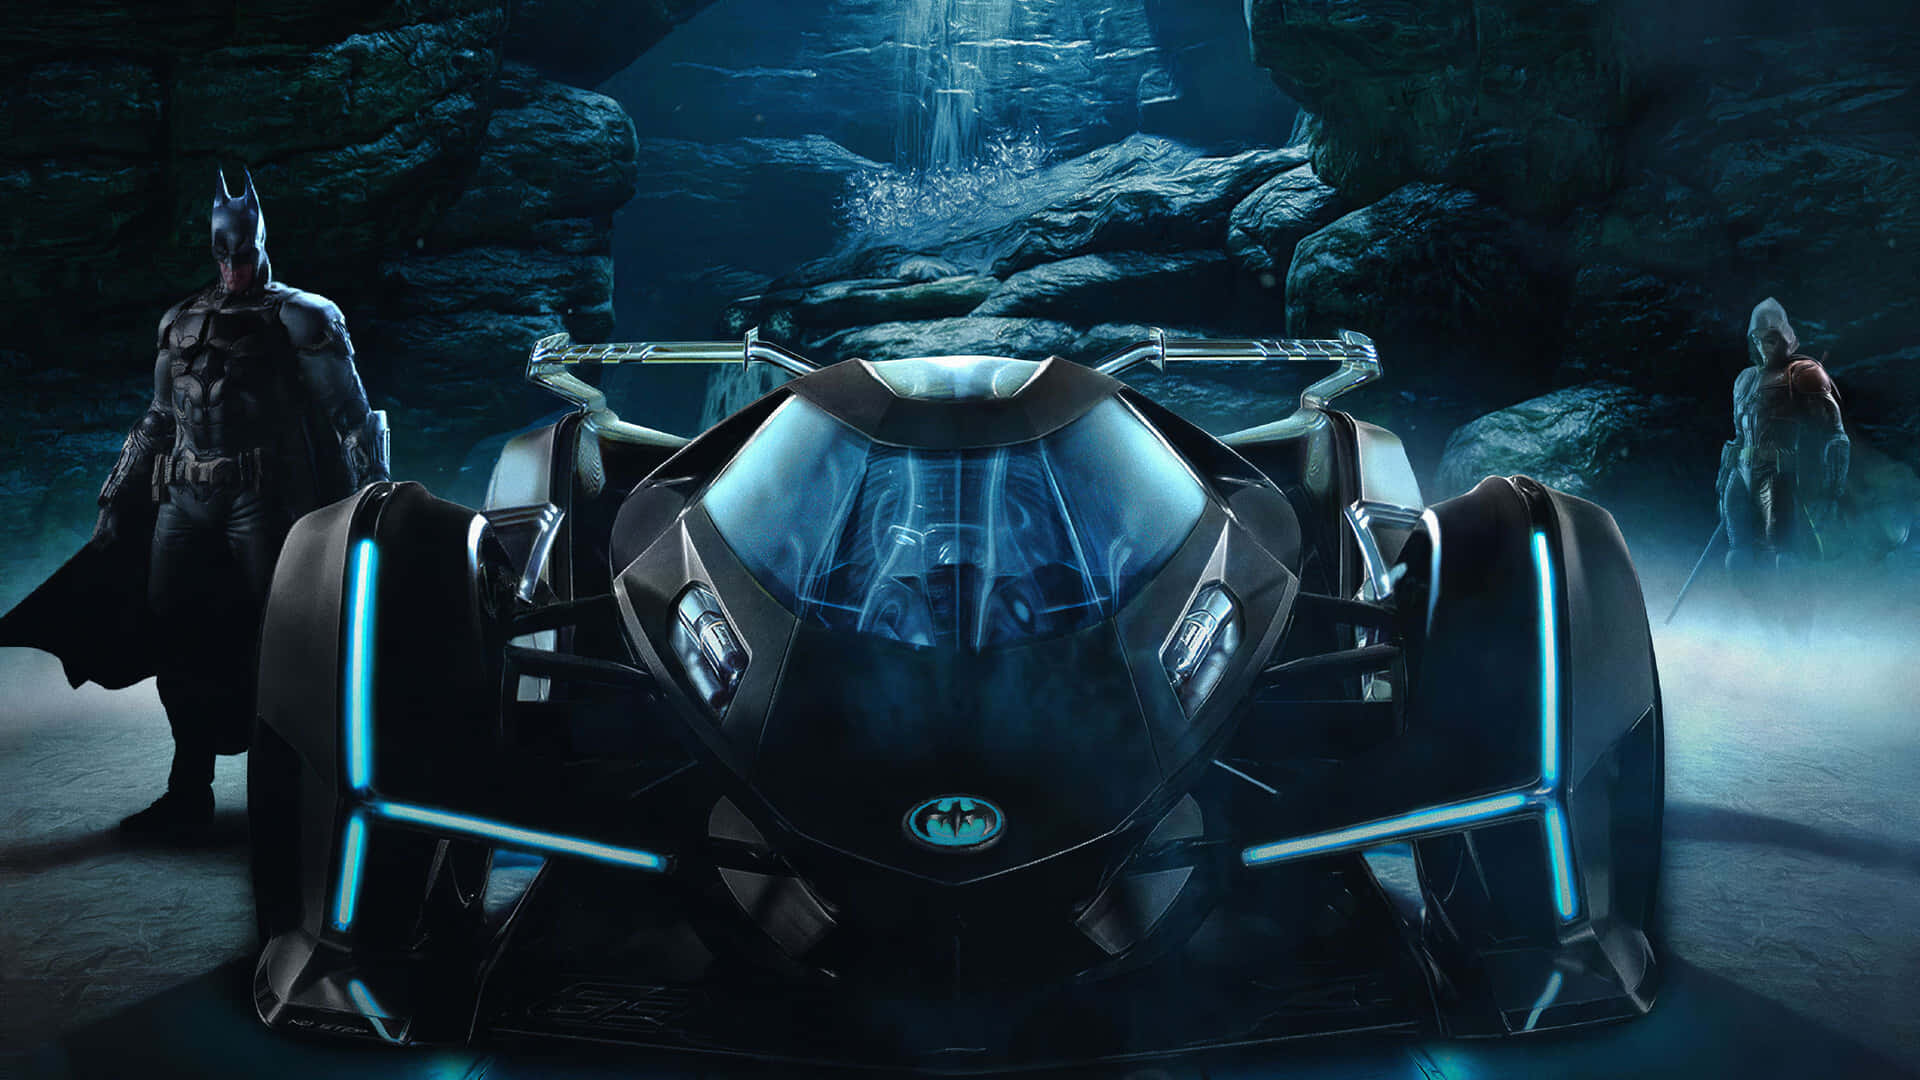 Get Ready for Action in the 4K Batmobile